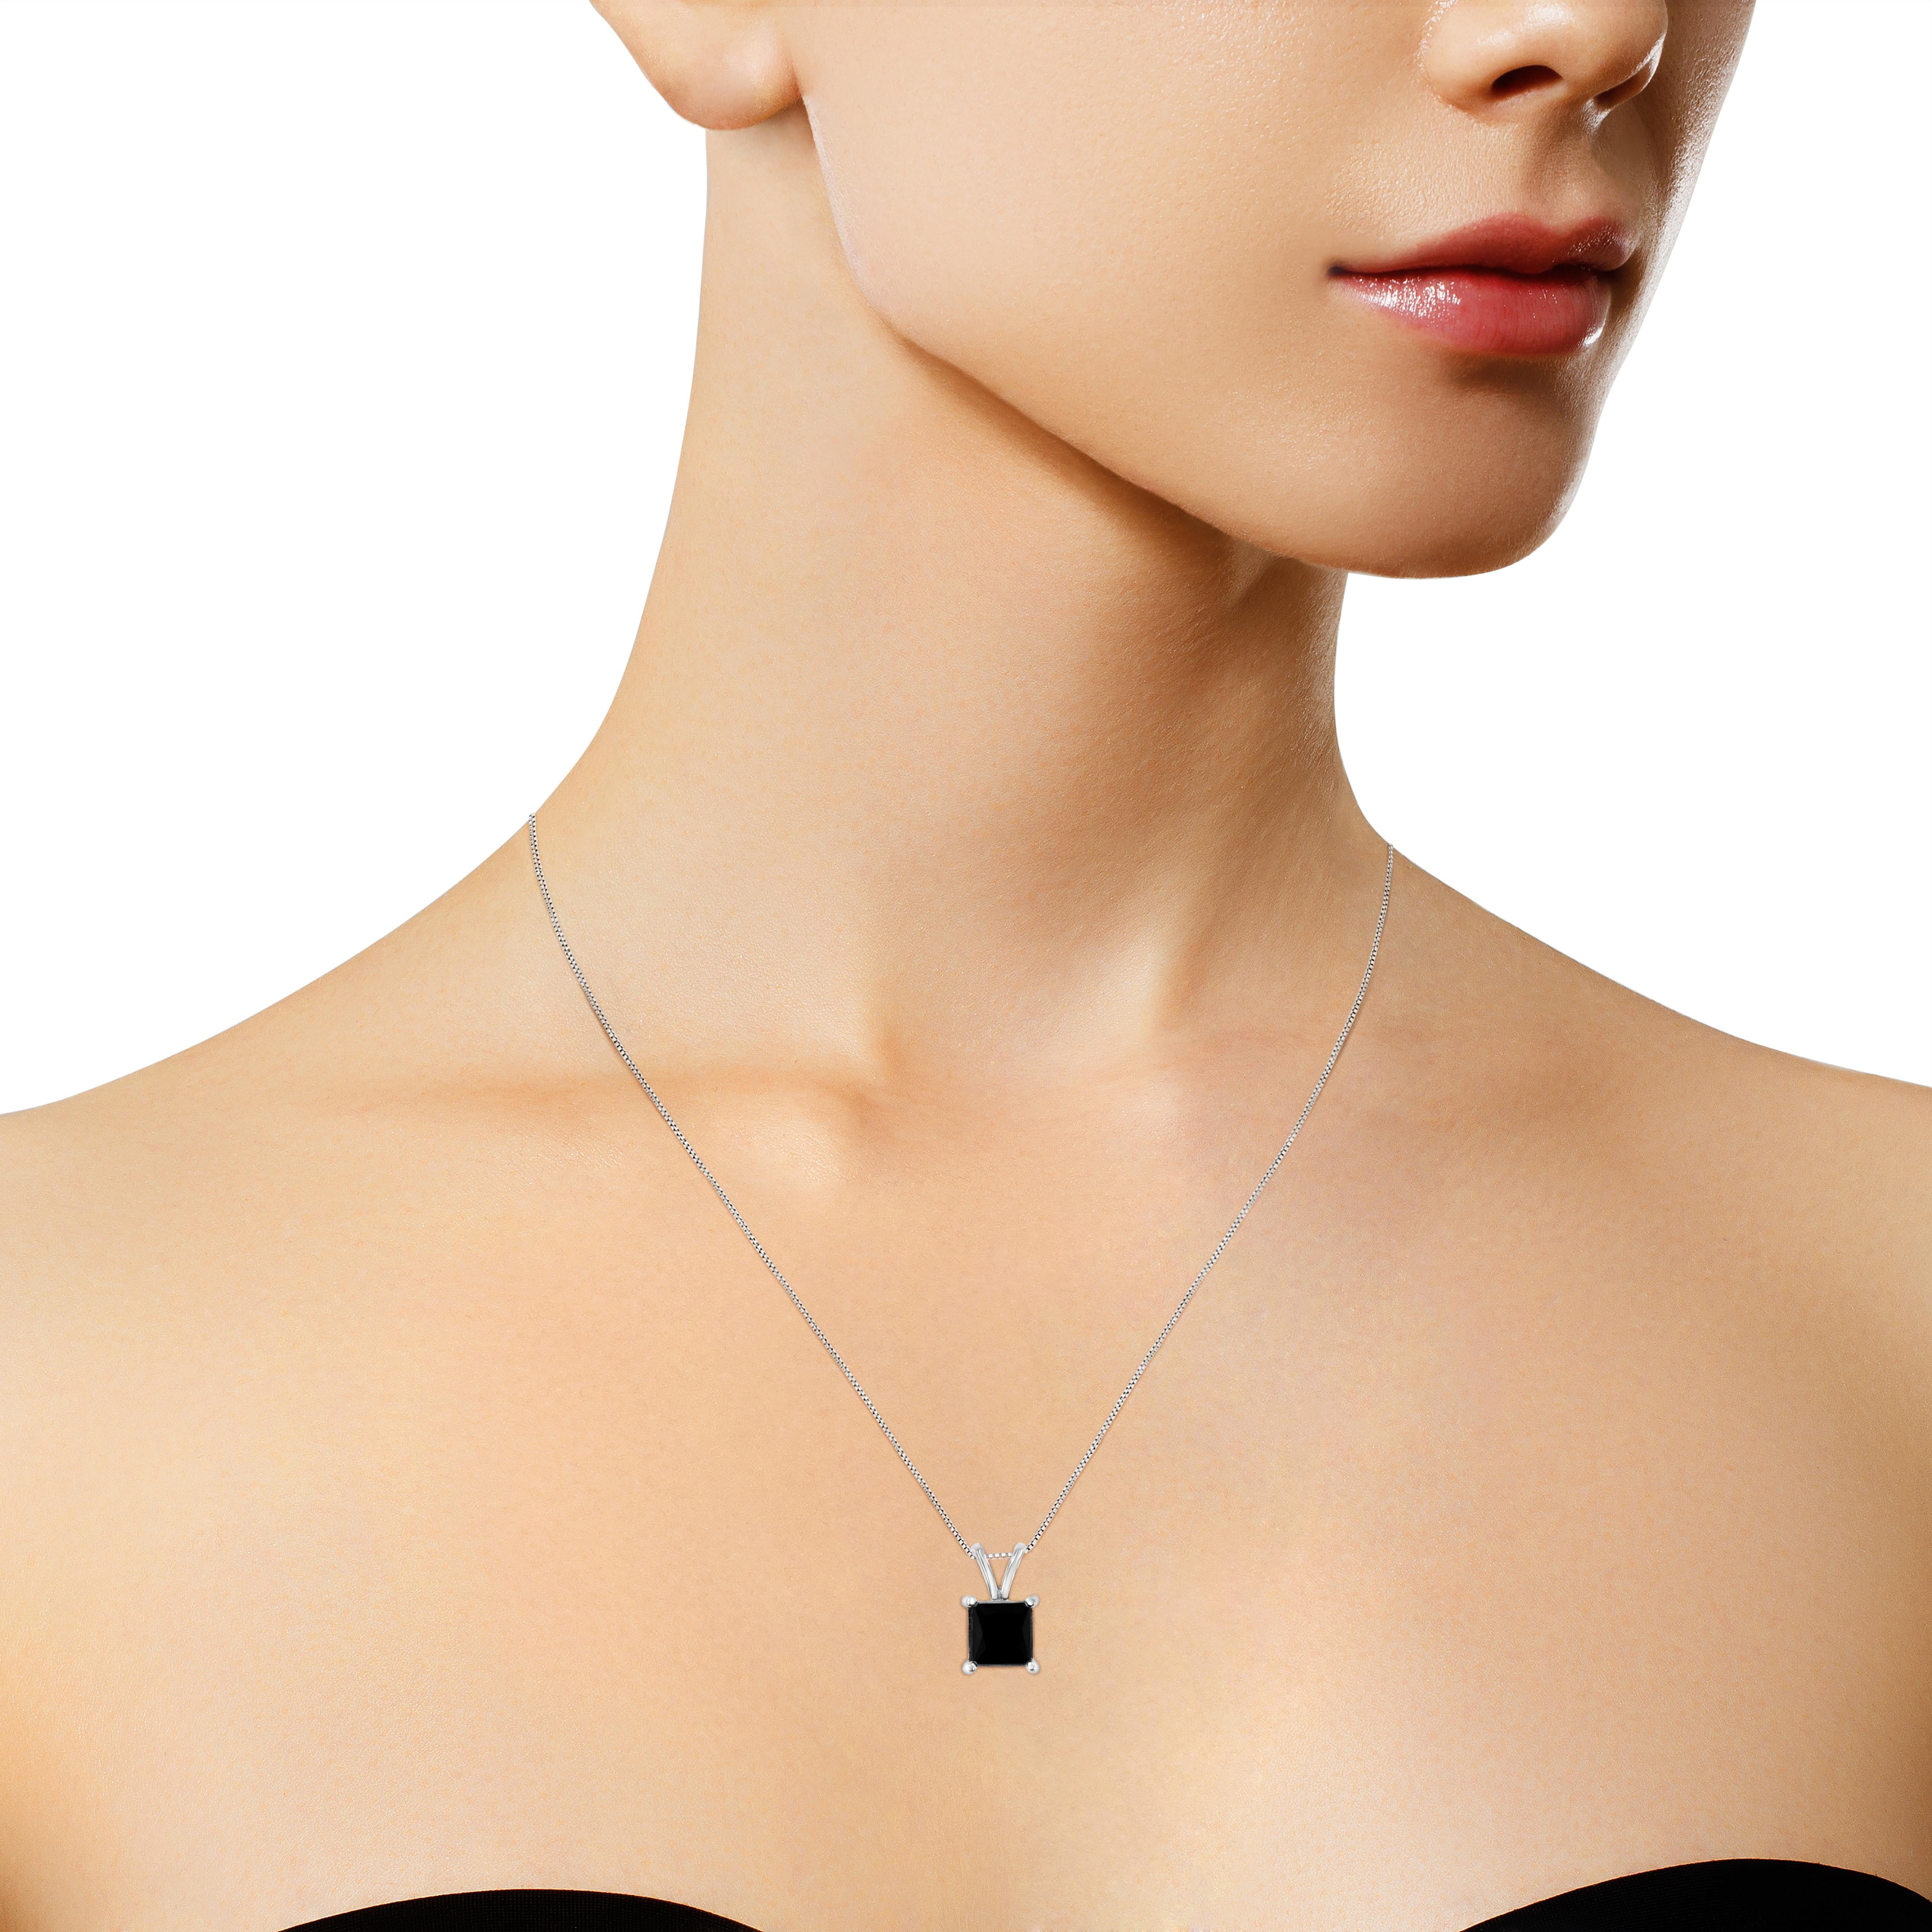 Contemporary .925 Sterling Silver 3.0 Carat Treated Black Diamond Solitaire Pendant Necklace